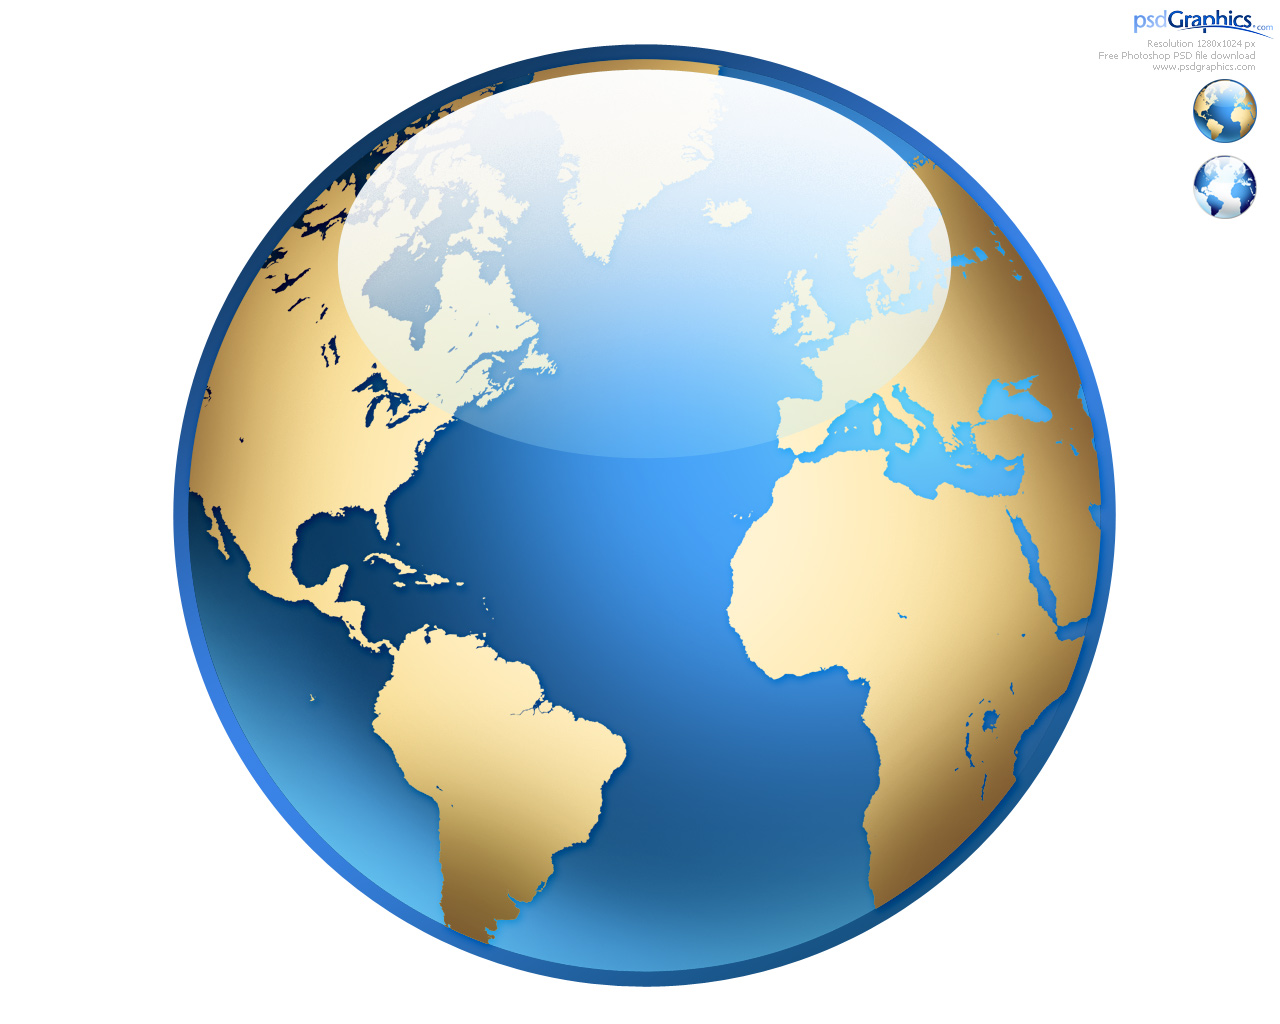 Picture Of A Globe Of The World - Clipart library